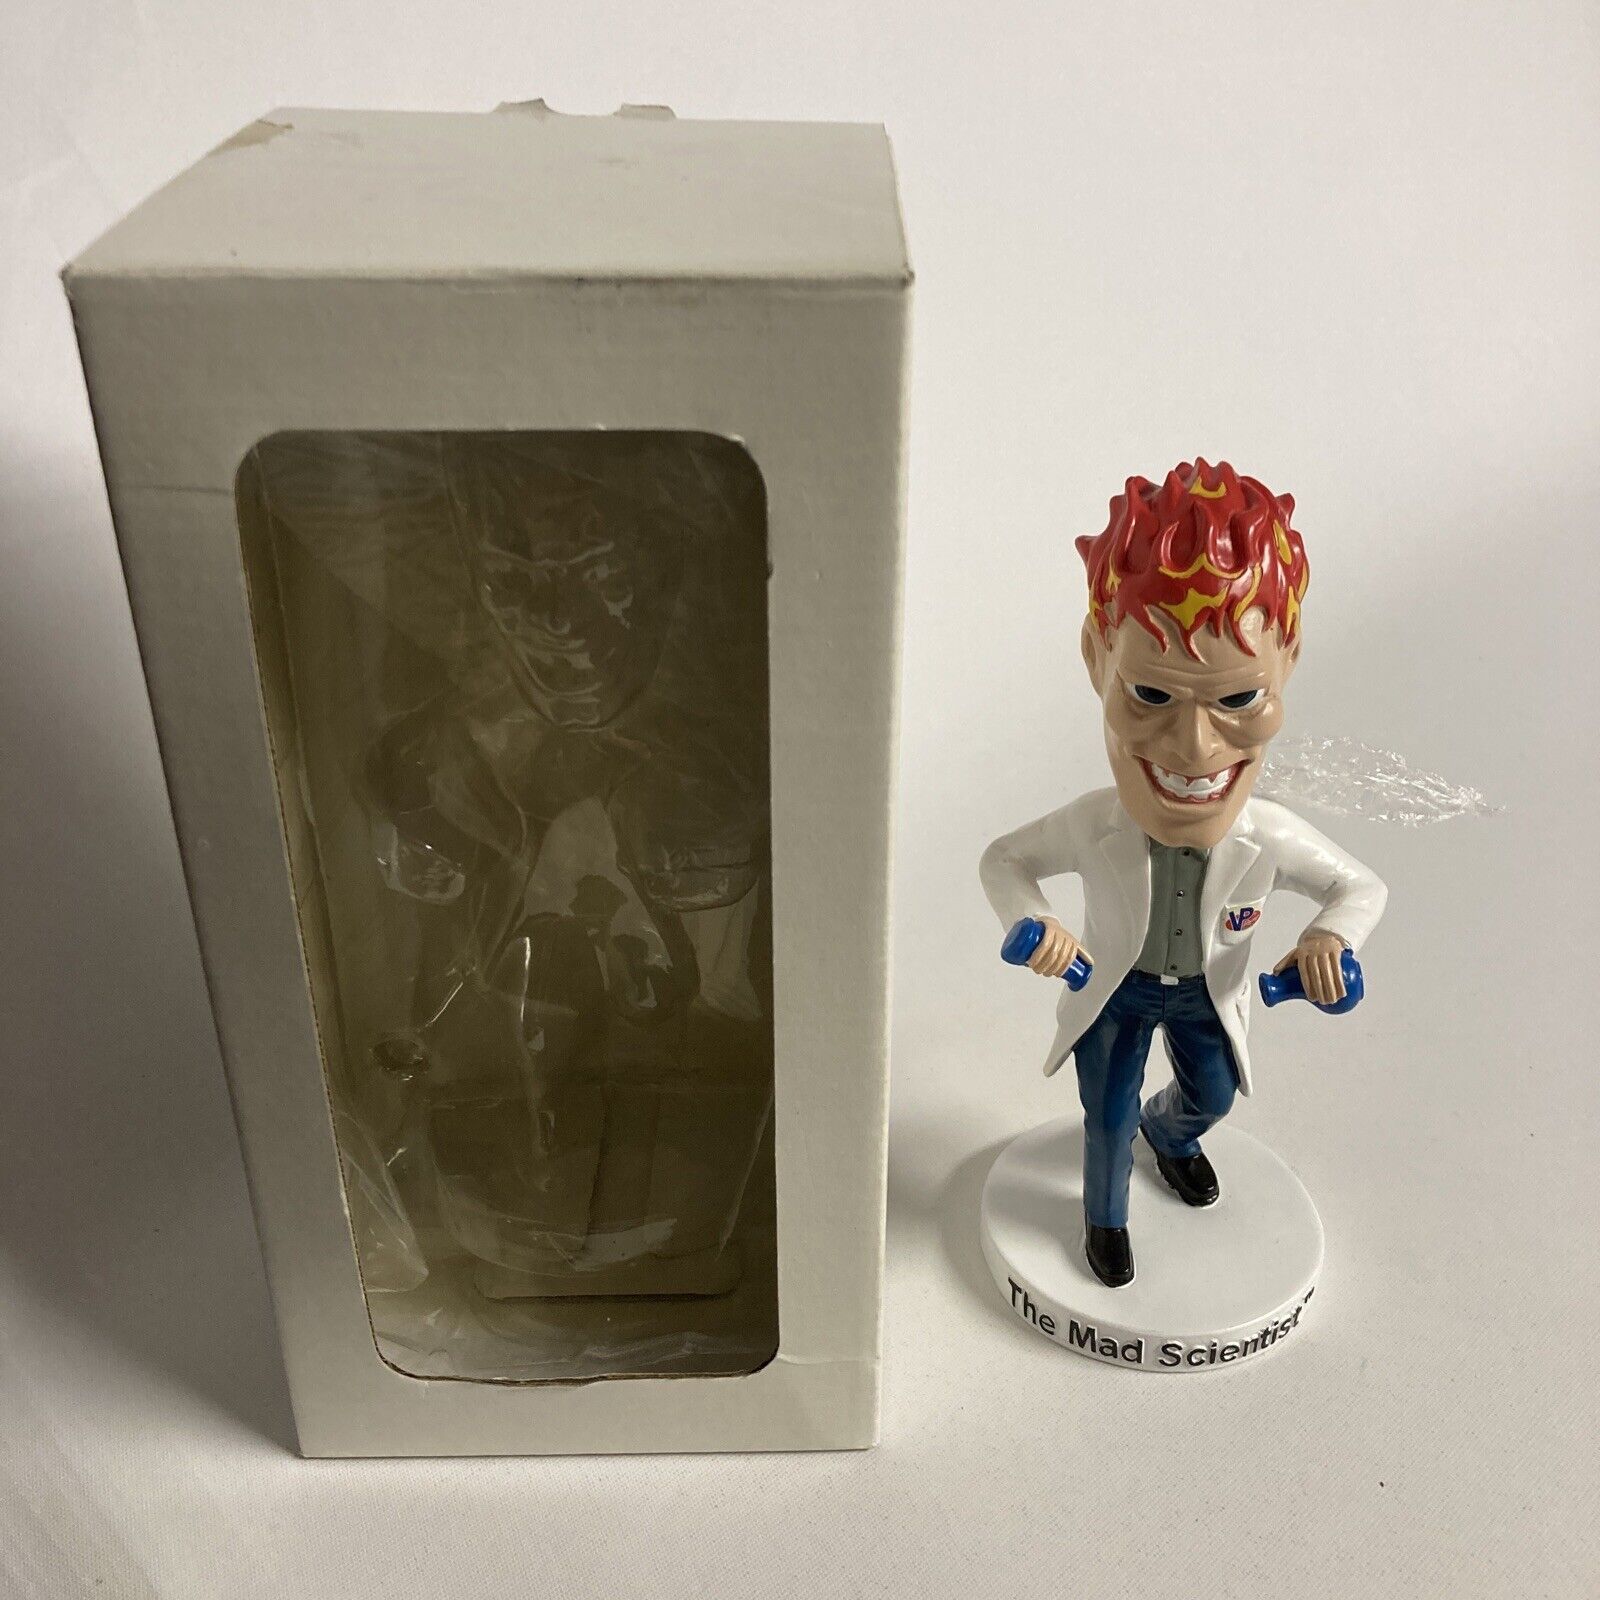 VP Racing The Mad Scientist 7.5” Promotional Bobblehead in Box